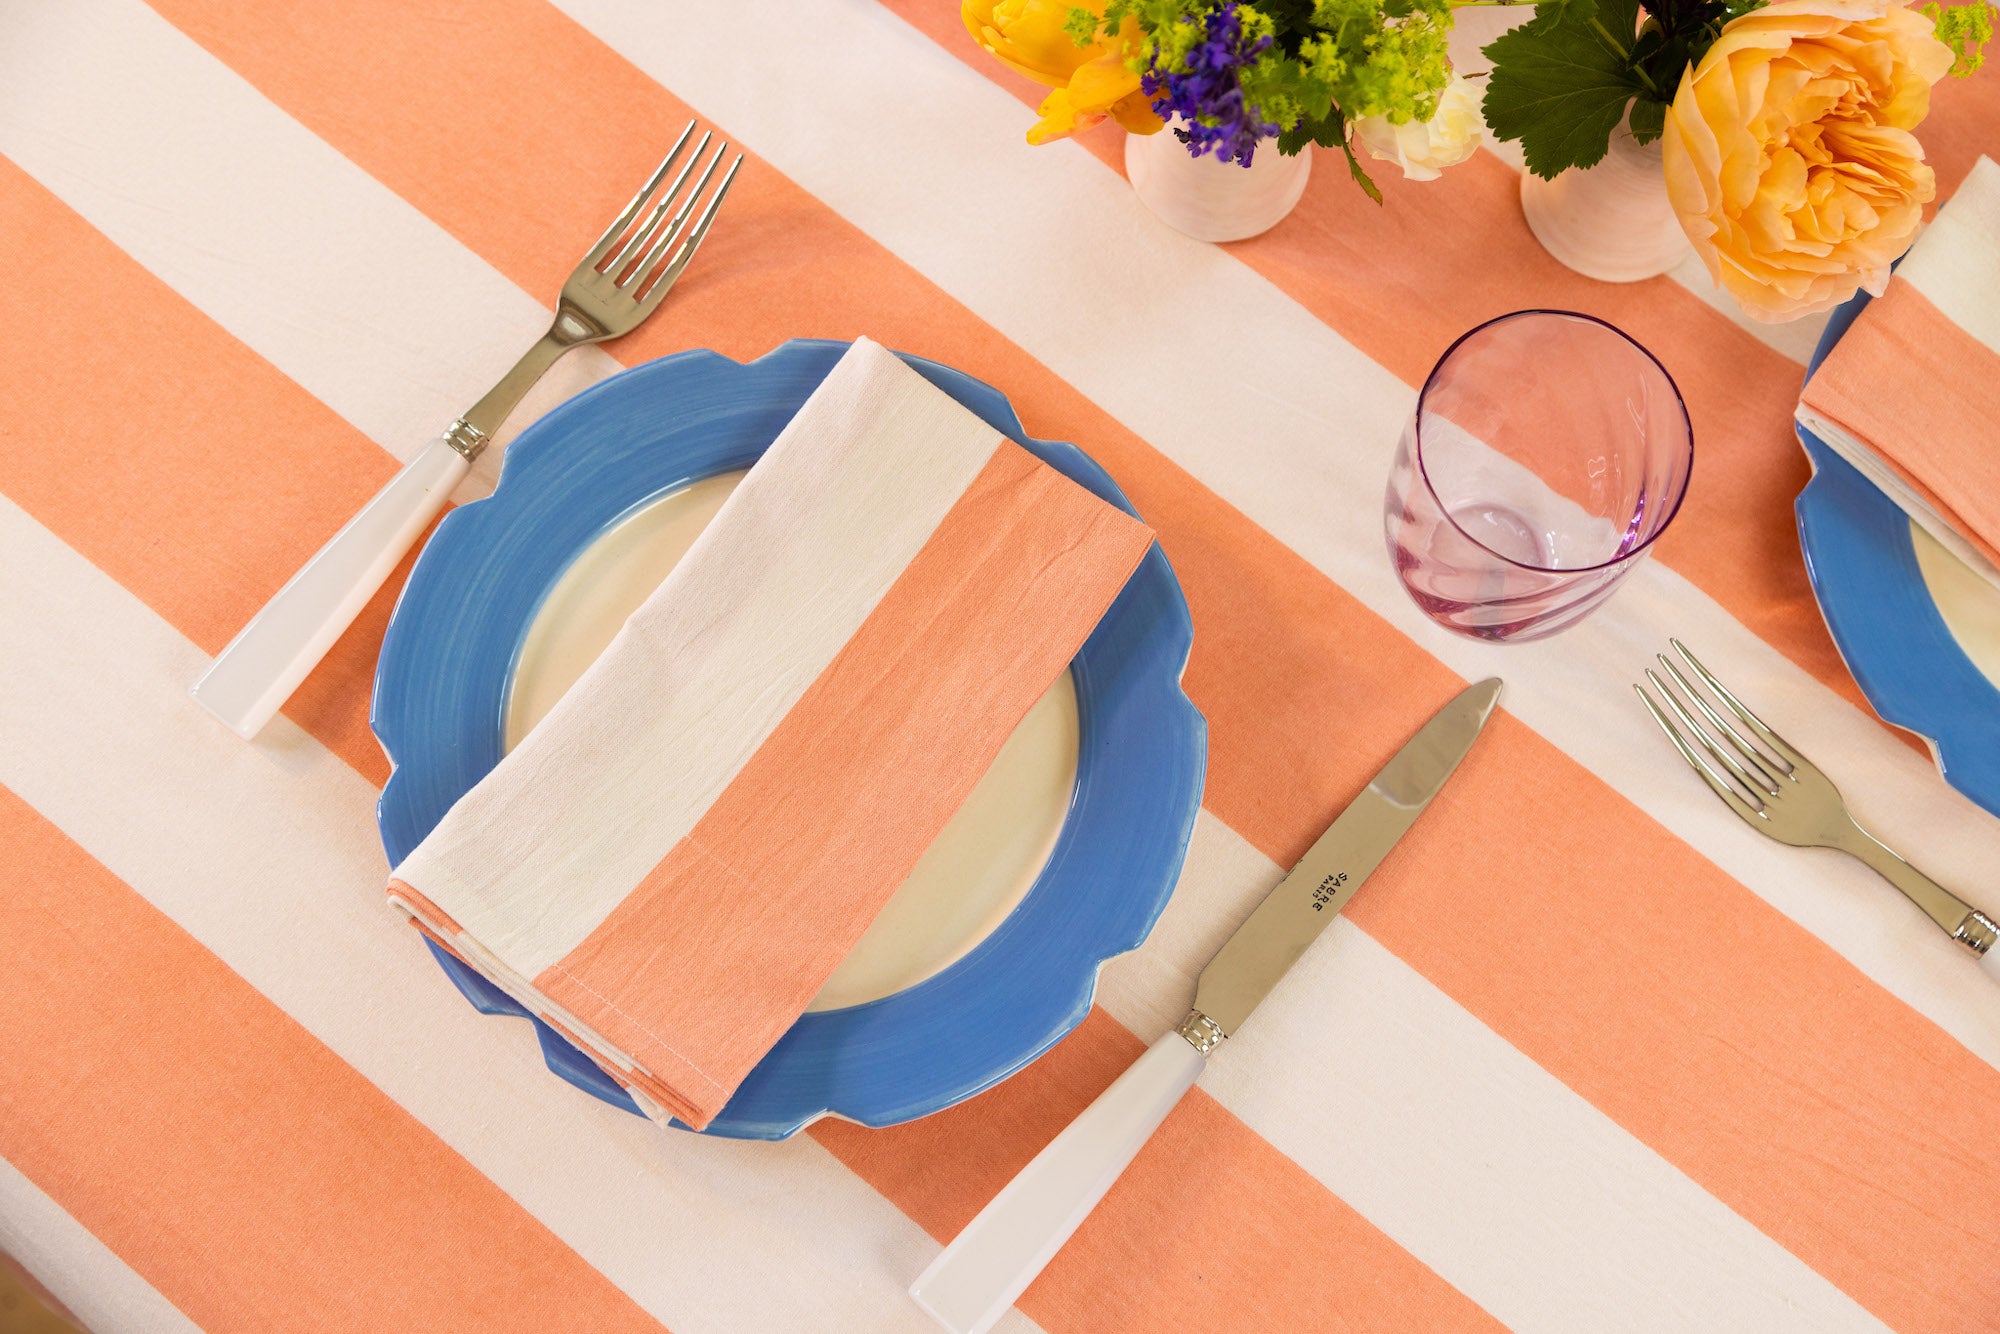 Peach and white striped napkin and table cloth